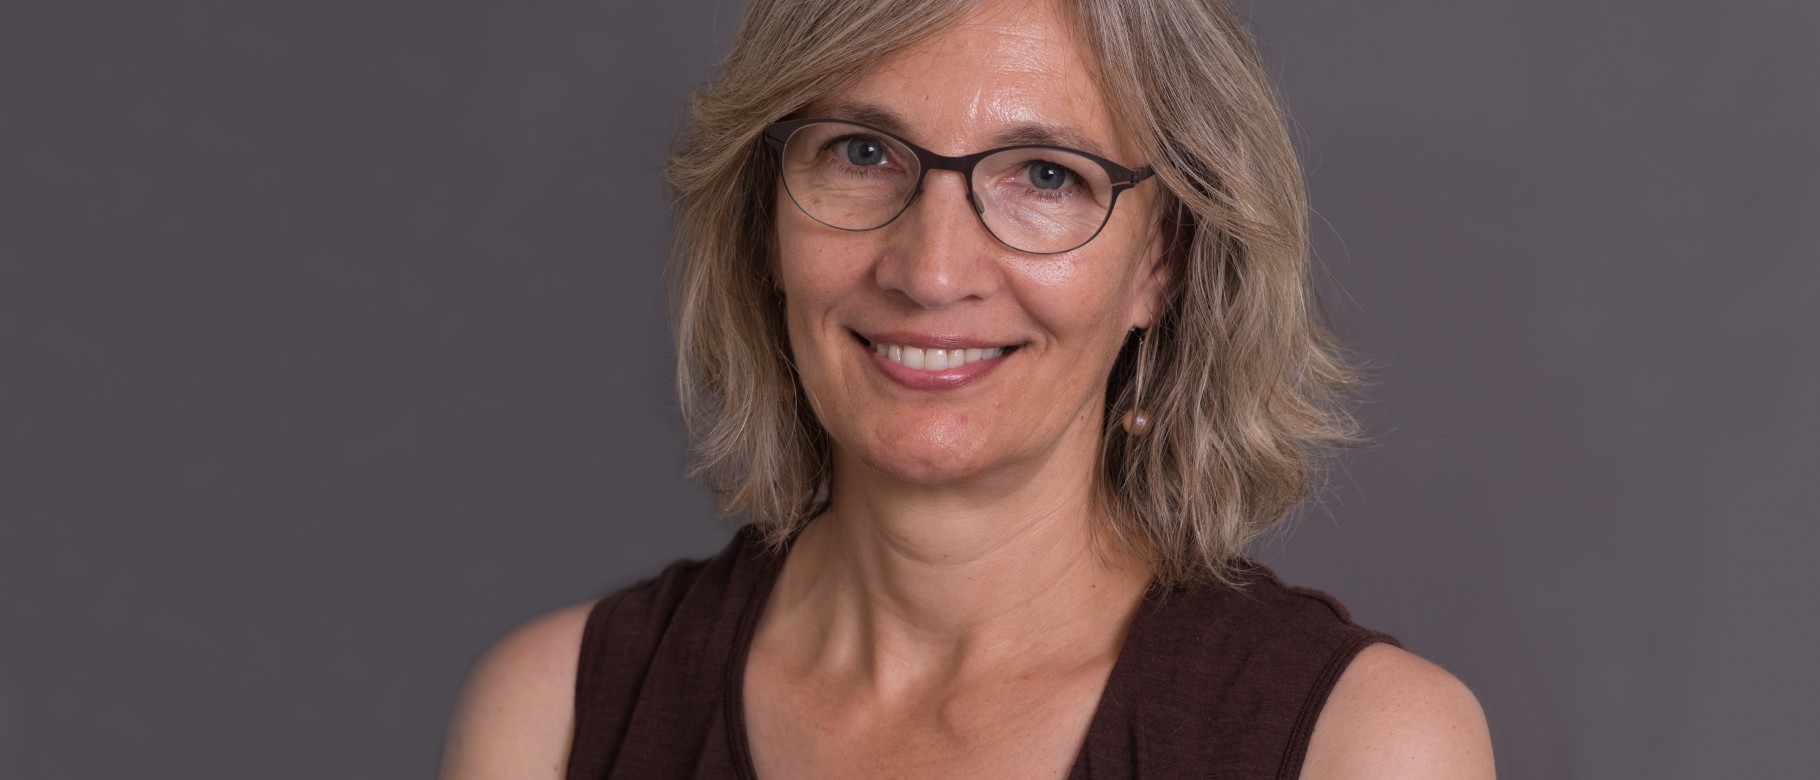 Michele Polacsek, professor in the Public Health program, co-authored an editorial in the American Journal of Public Health